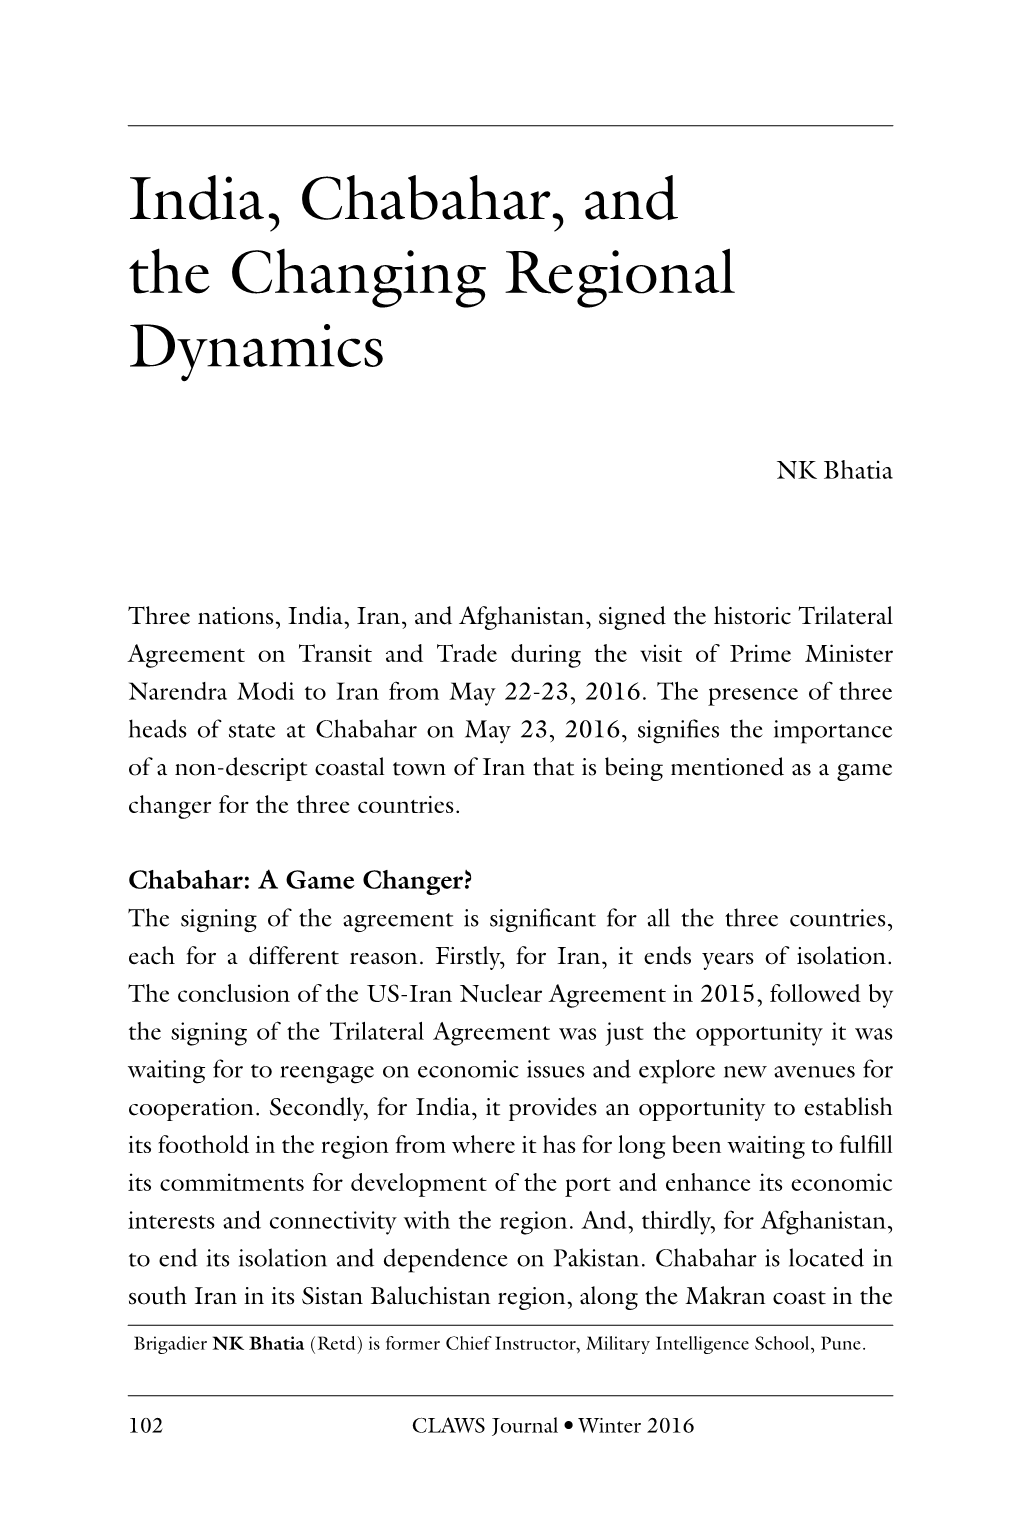 India, Chabahar, and the Changing Regional Dynamics, By